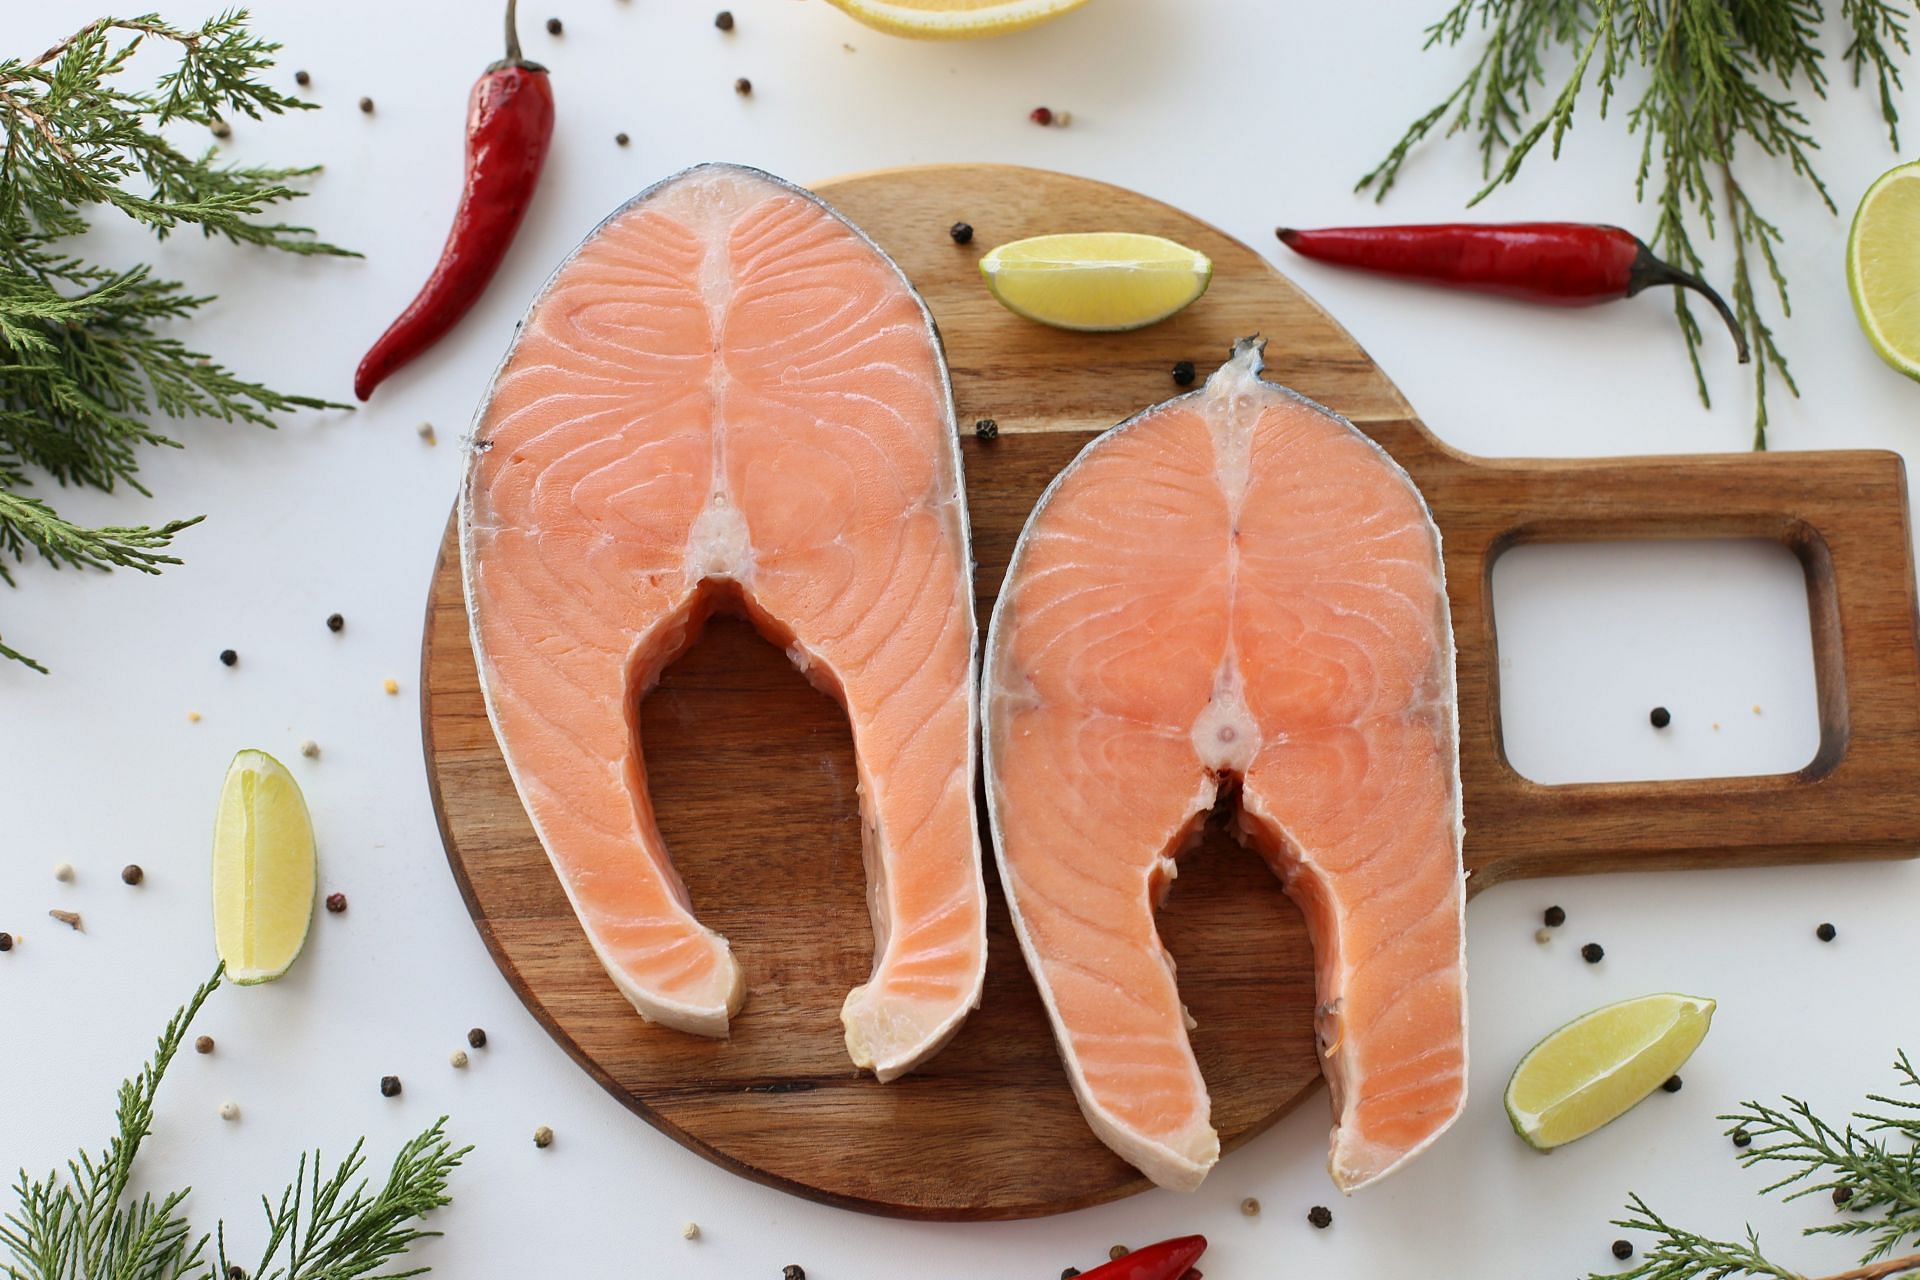 Oily fish, red meat and eggs are a good source of Vitamin D (Image via Pexels @Рыба Моей Мечты)